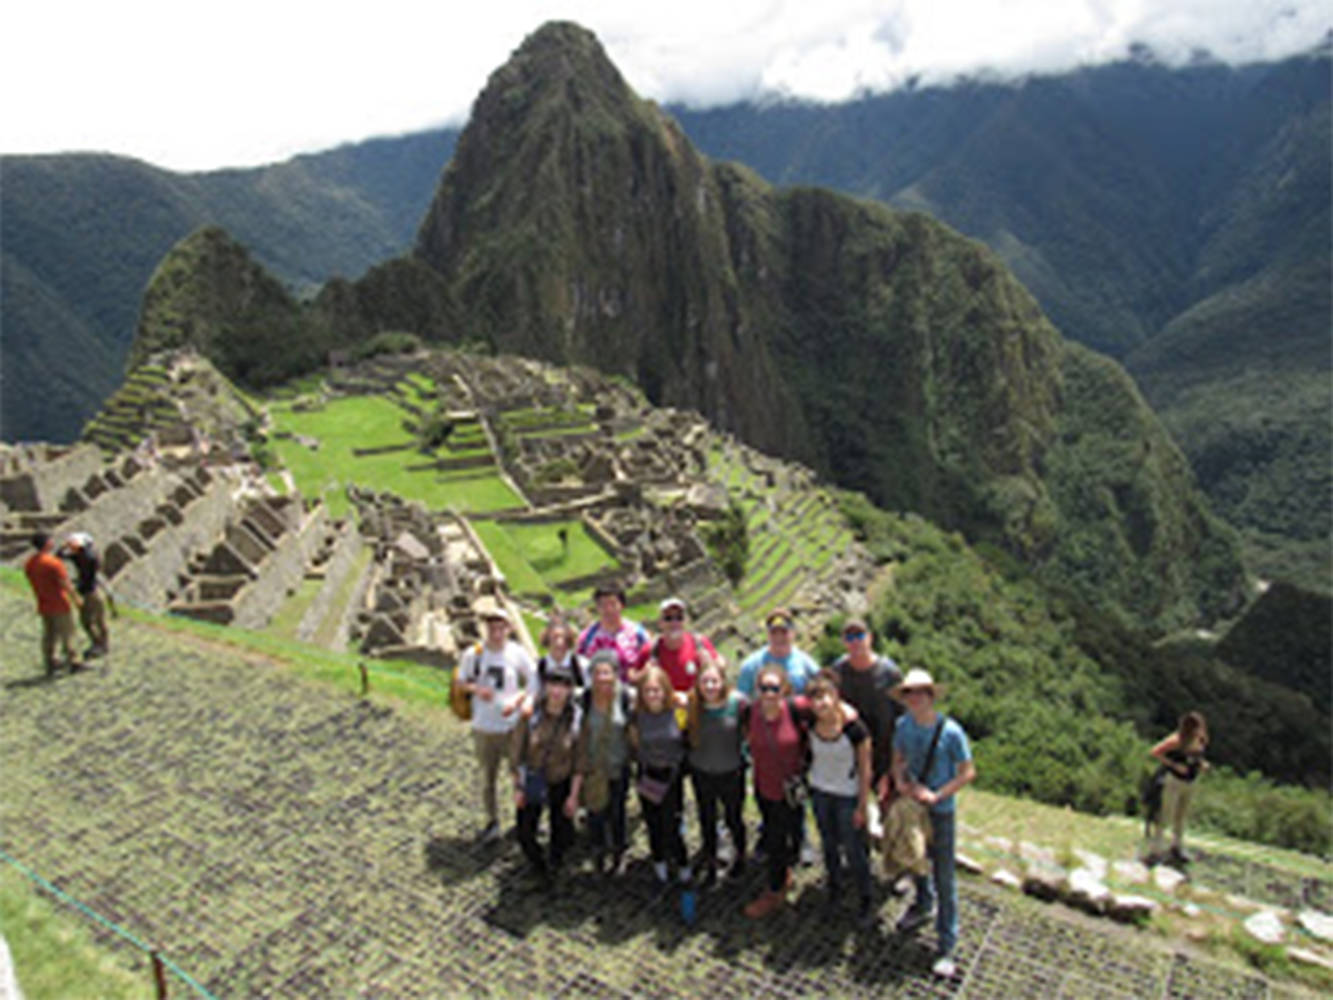 Students share stories of Peru